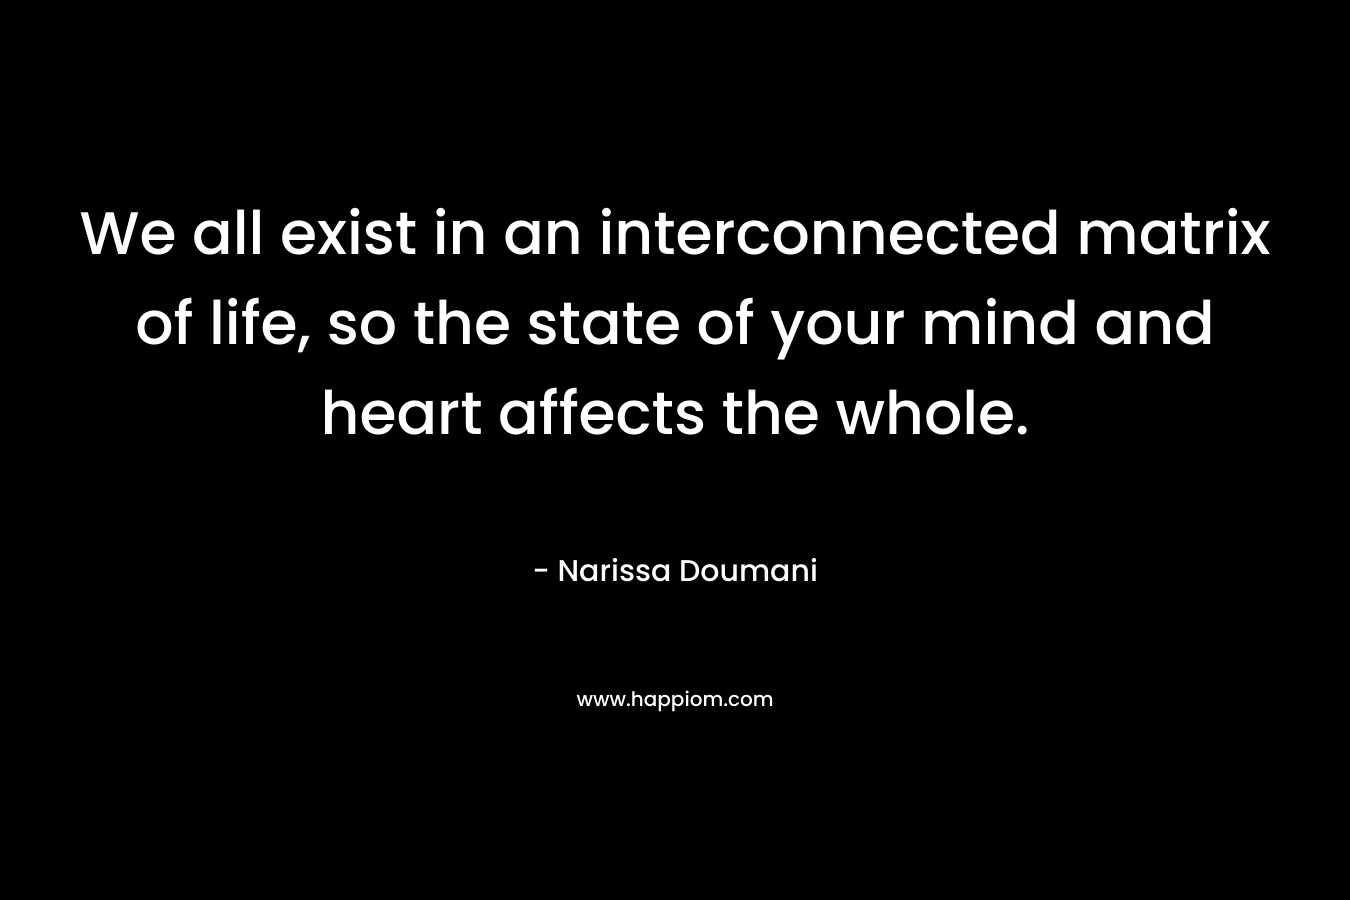 We all exist in an interconnected matrix of life, so the state of your mind and heart affects the whole.